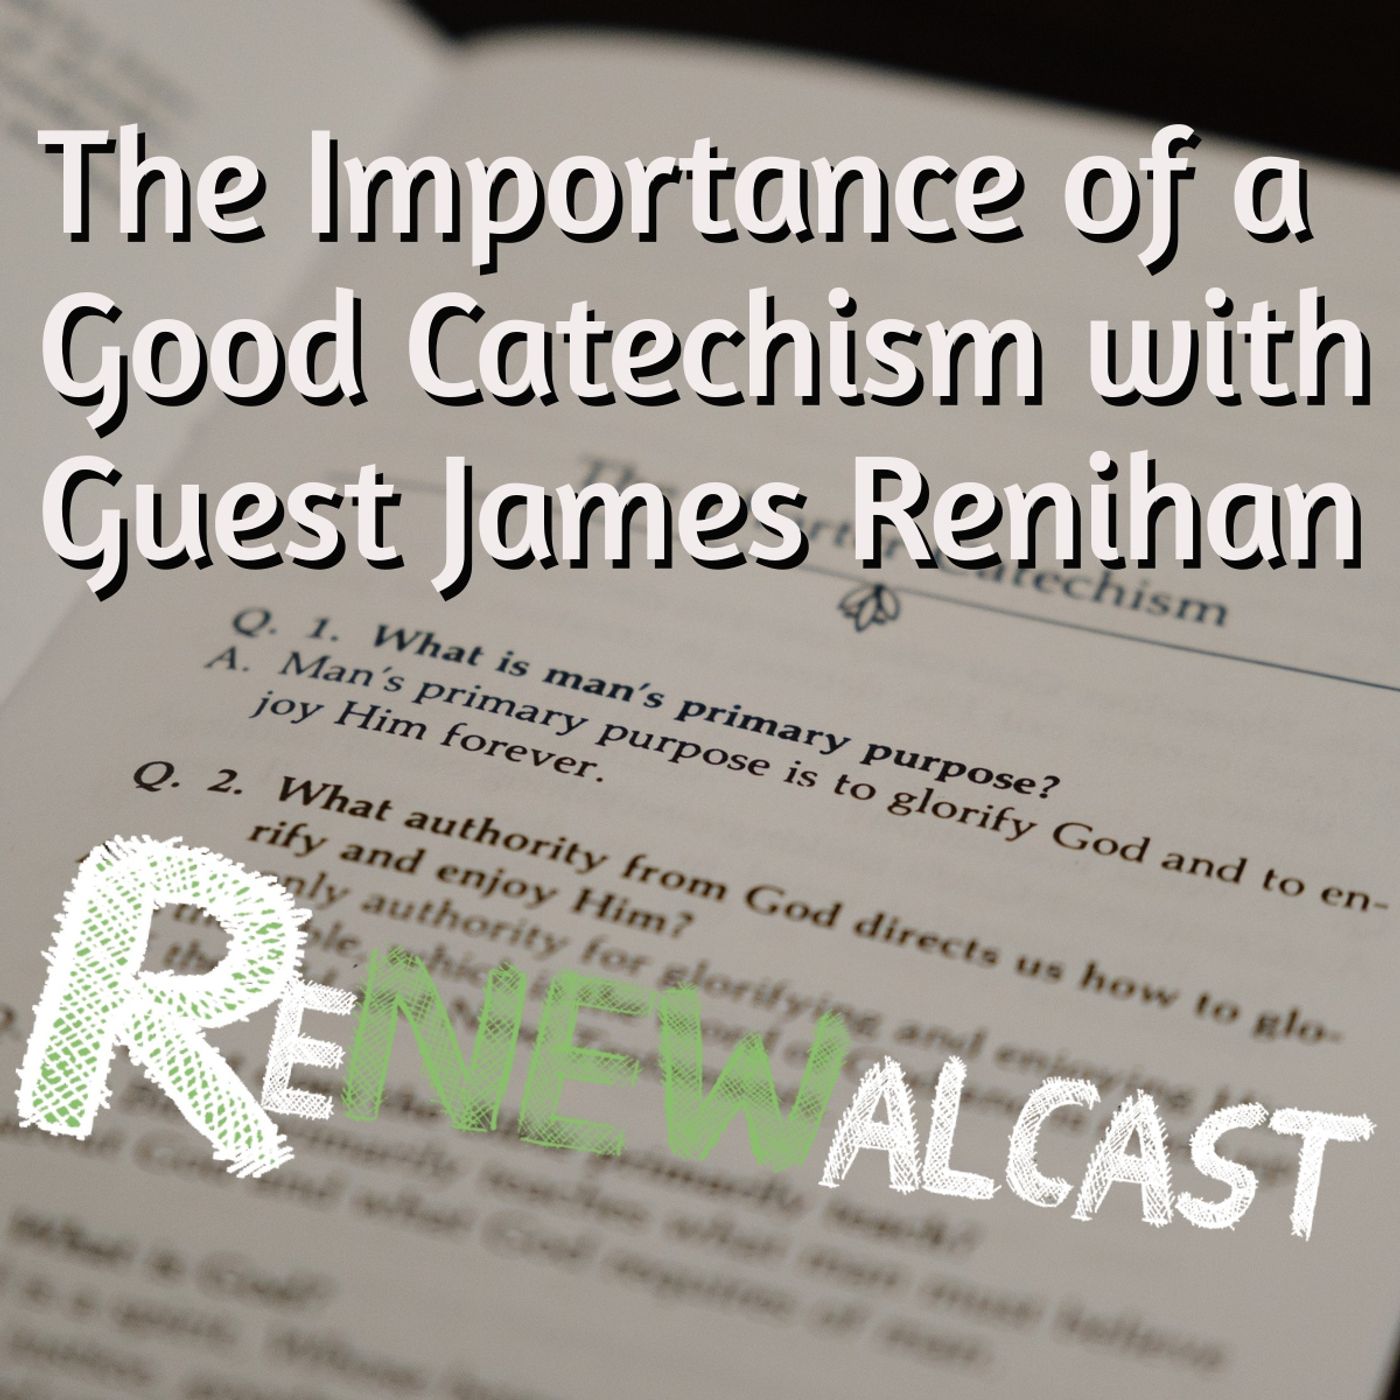 The Importance of a Good Catechism with Guest James Renihan